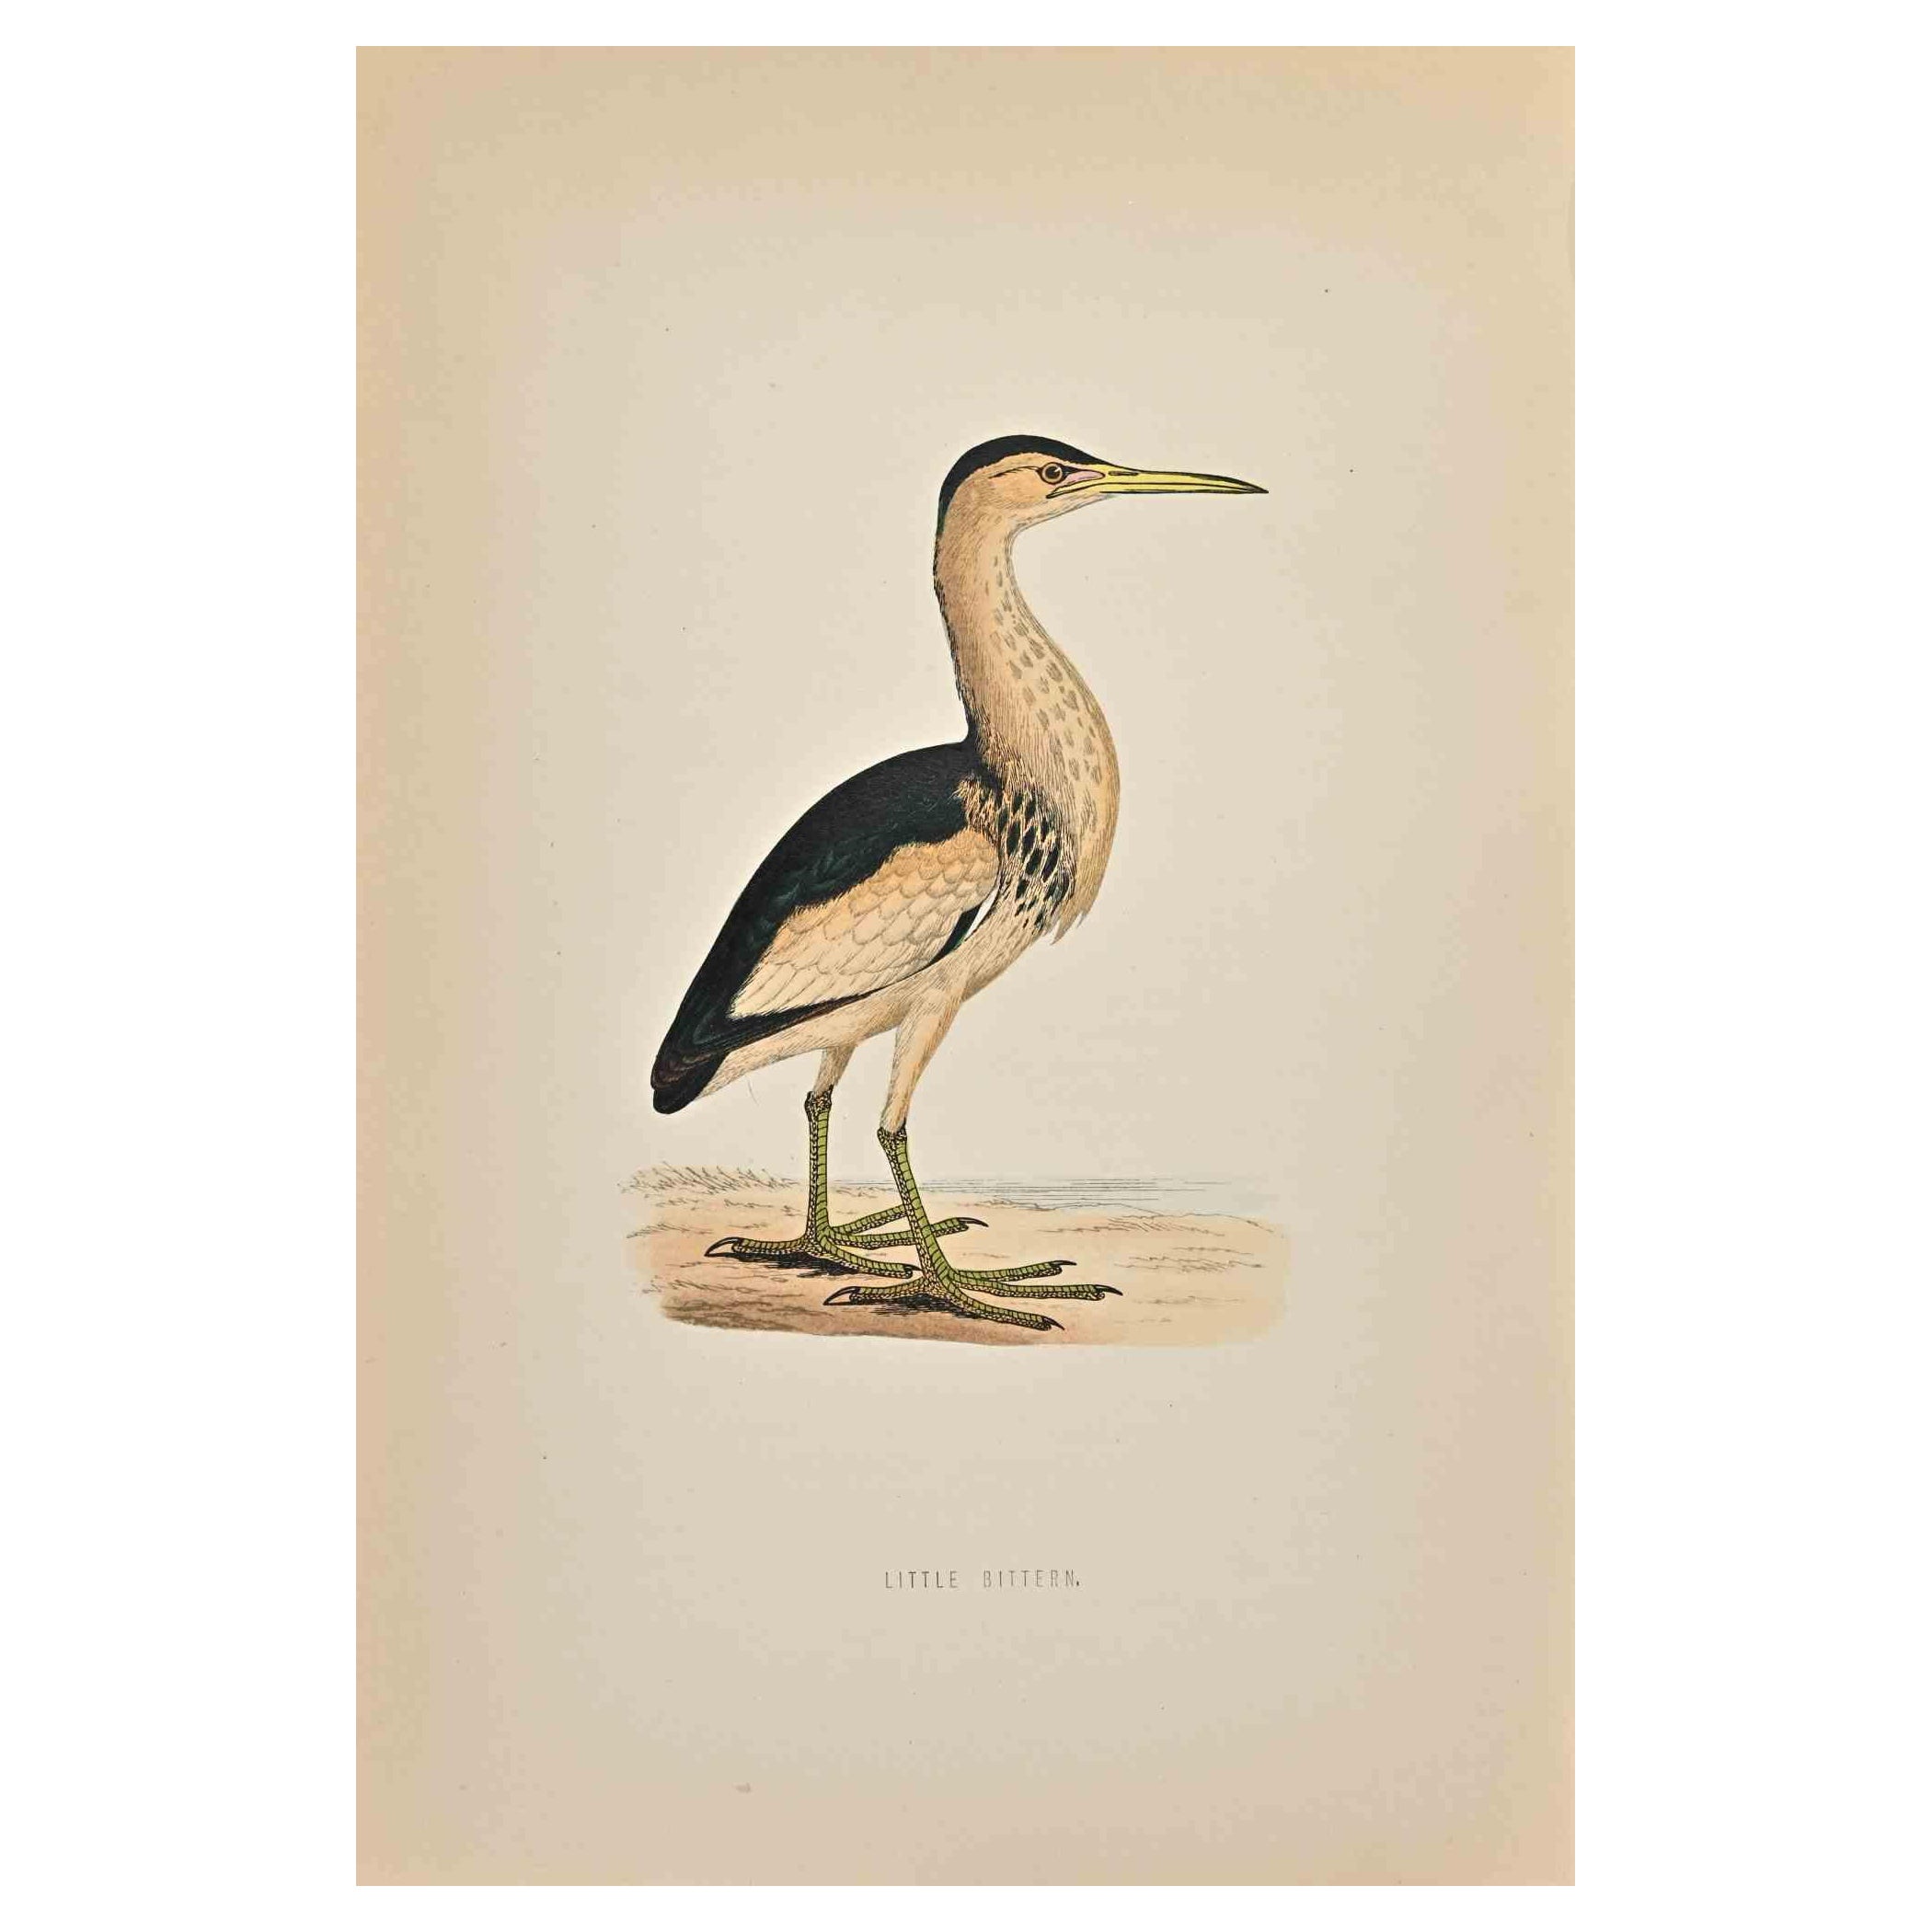 Little Bittern is  a modern artwork realized in 1870 by the British artist Alexander Francis Lydon (1836-1917) . 

Woodcut print, hand colored, published by London, Bell & Sons, 1870.  Name of the bird printed in plate. This work is part of a print